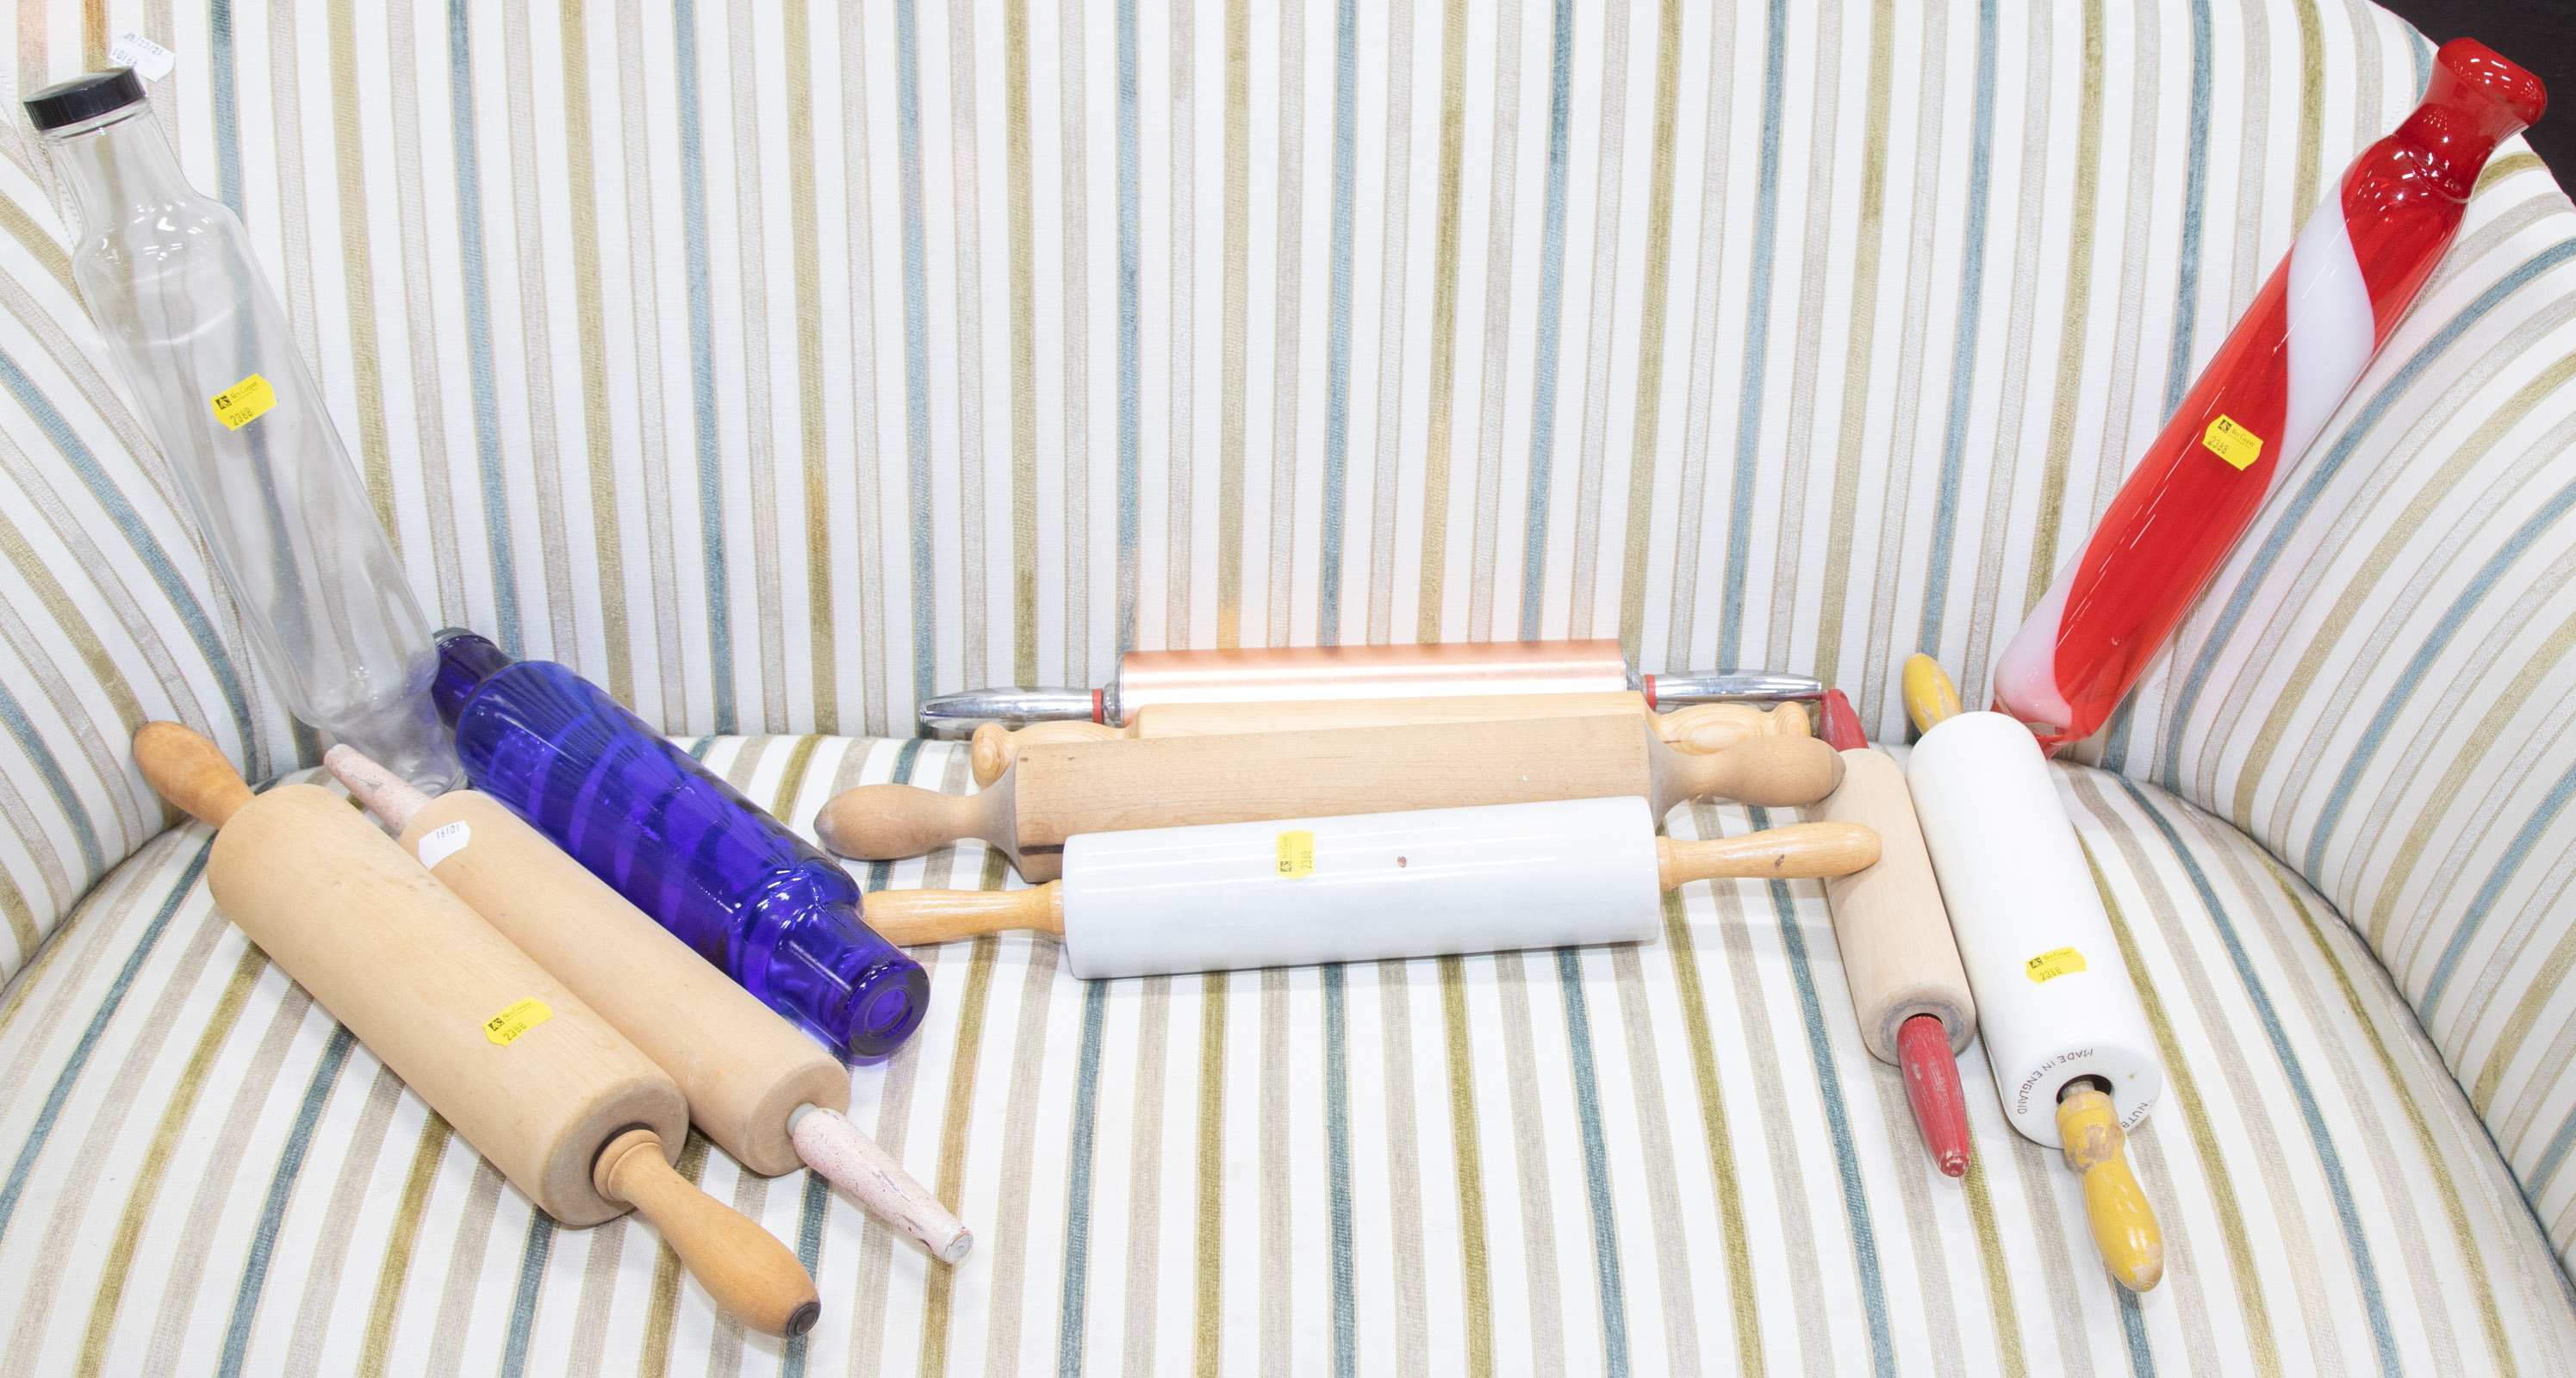 COLLECTION OF ELEVEN ROLLING PINS 5